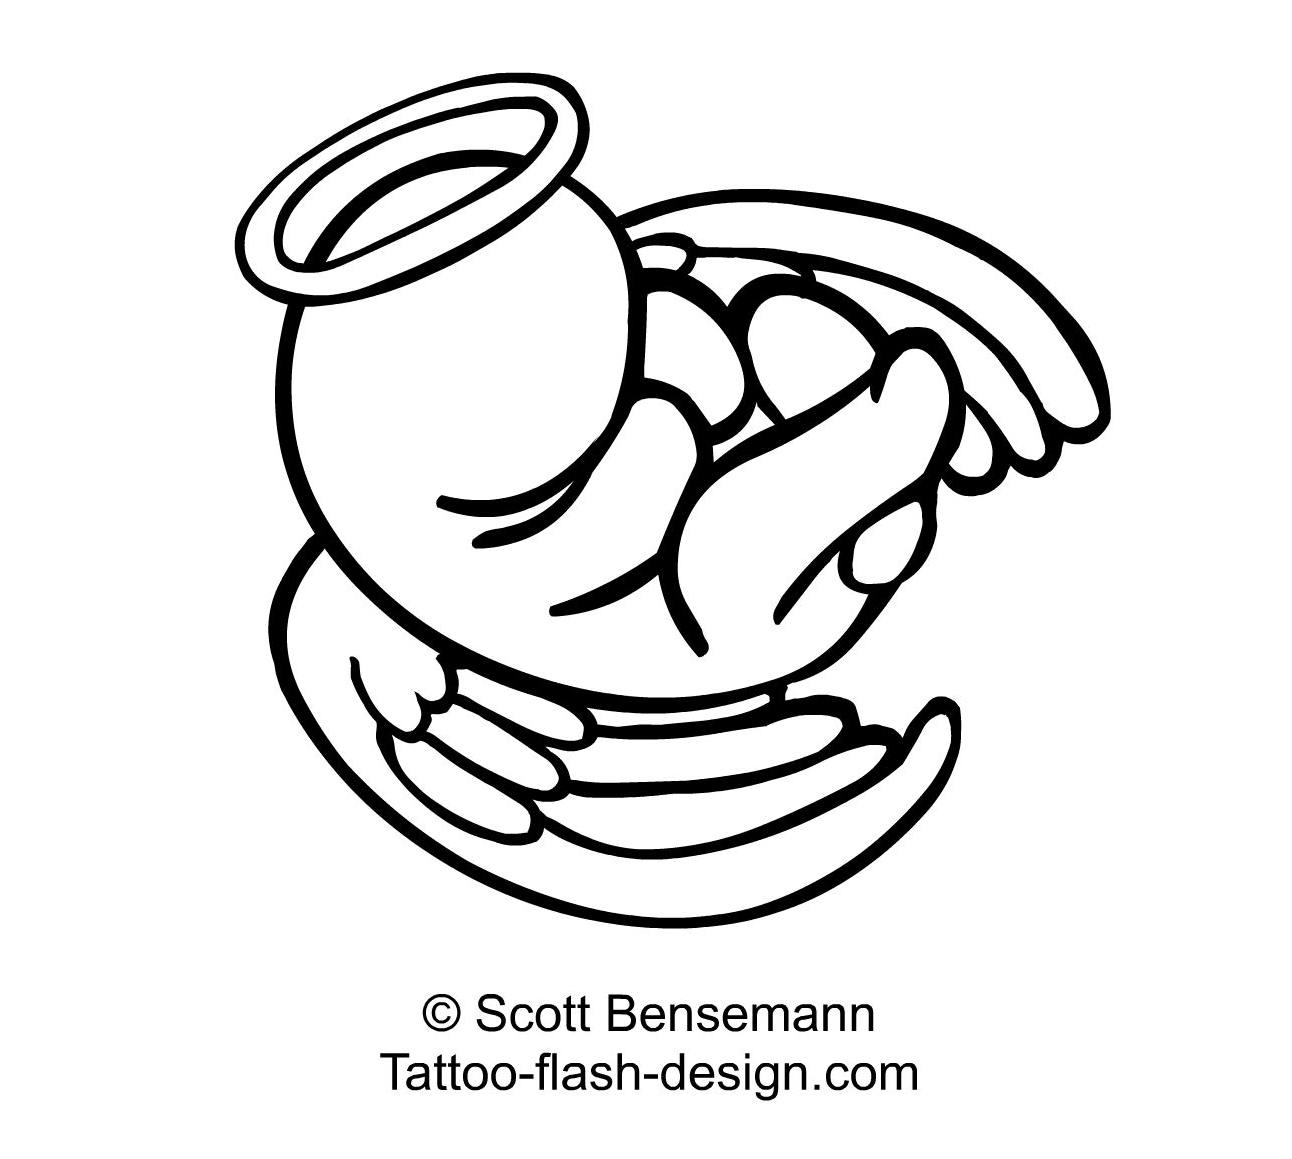 Miscarriage tattoo Design – Small unborn baby with wings and holy halo by Scott Bensemann